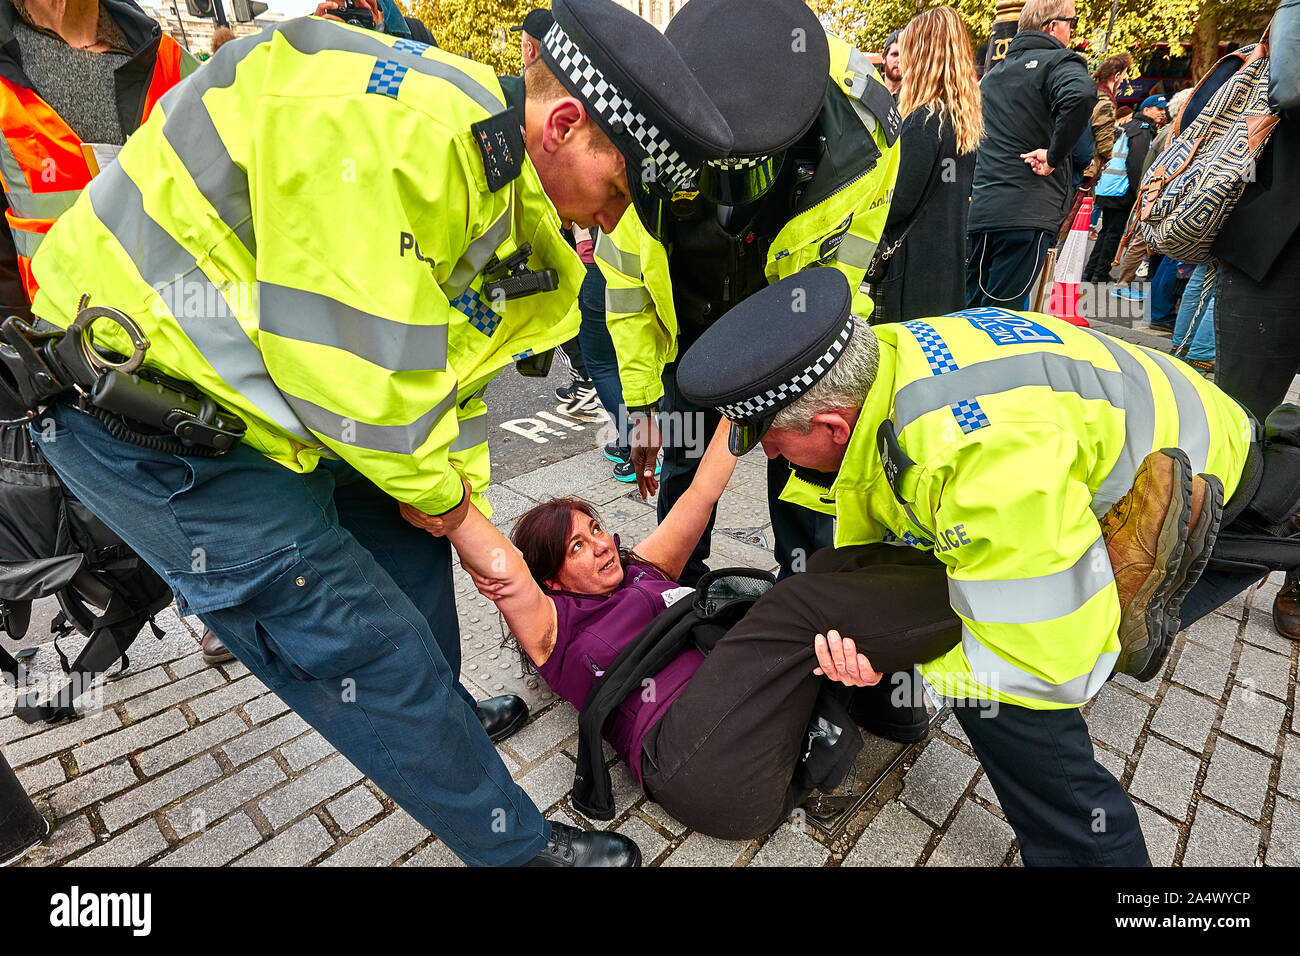 London, U.K. - Oct 16, 2019: An environmental campaigner from Extinction Rebellion is dragged away by Police after blocking watched on a road in Trafalgar Square. Stock Photo